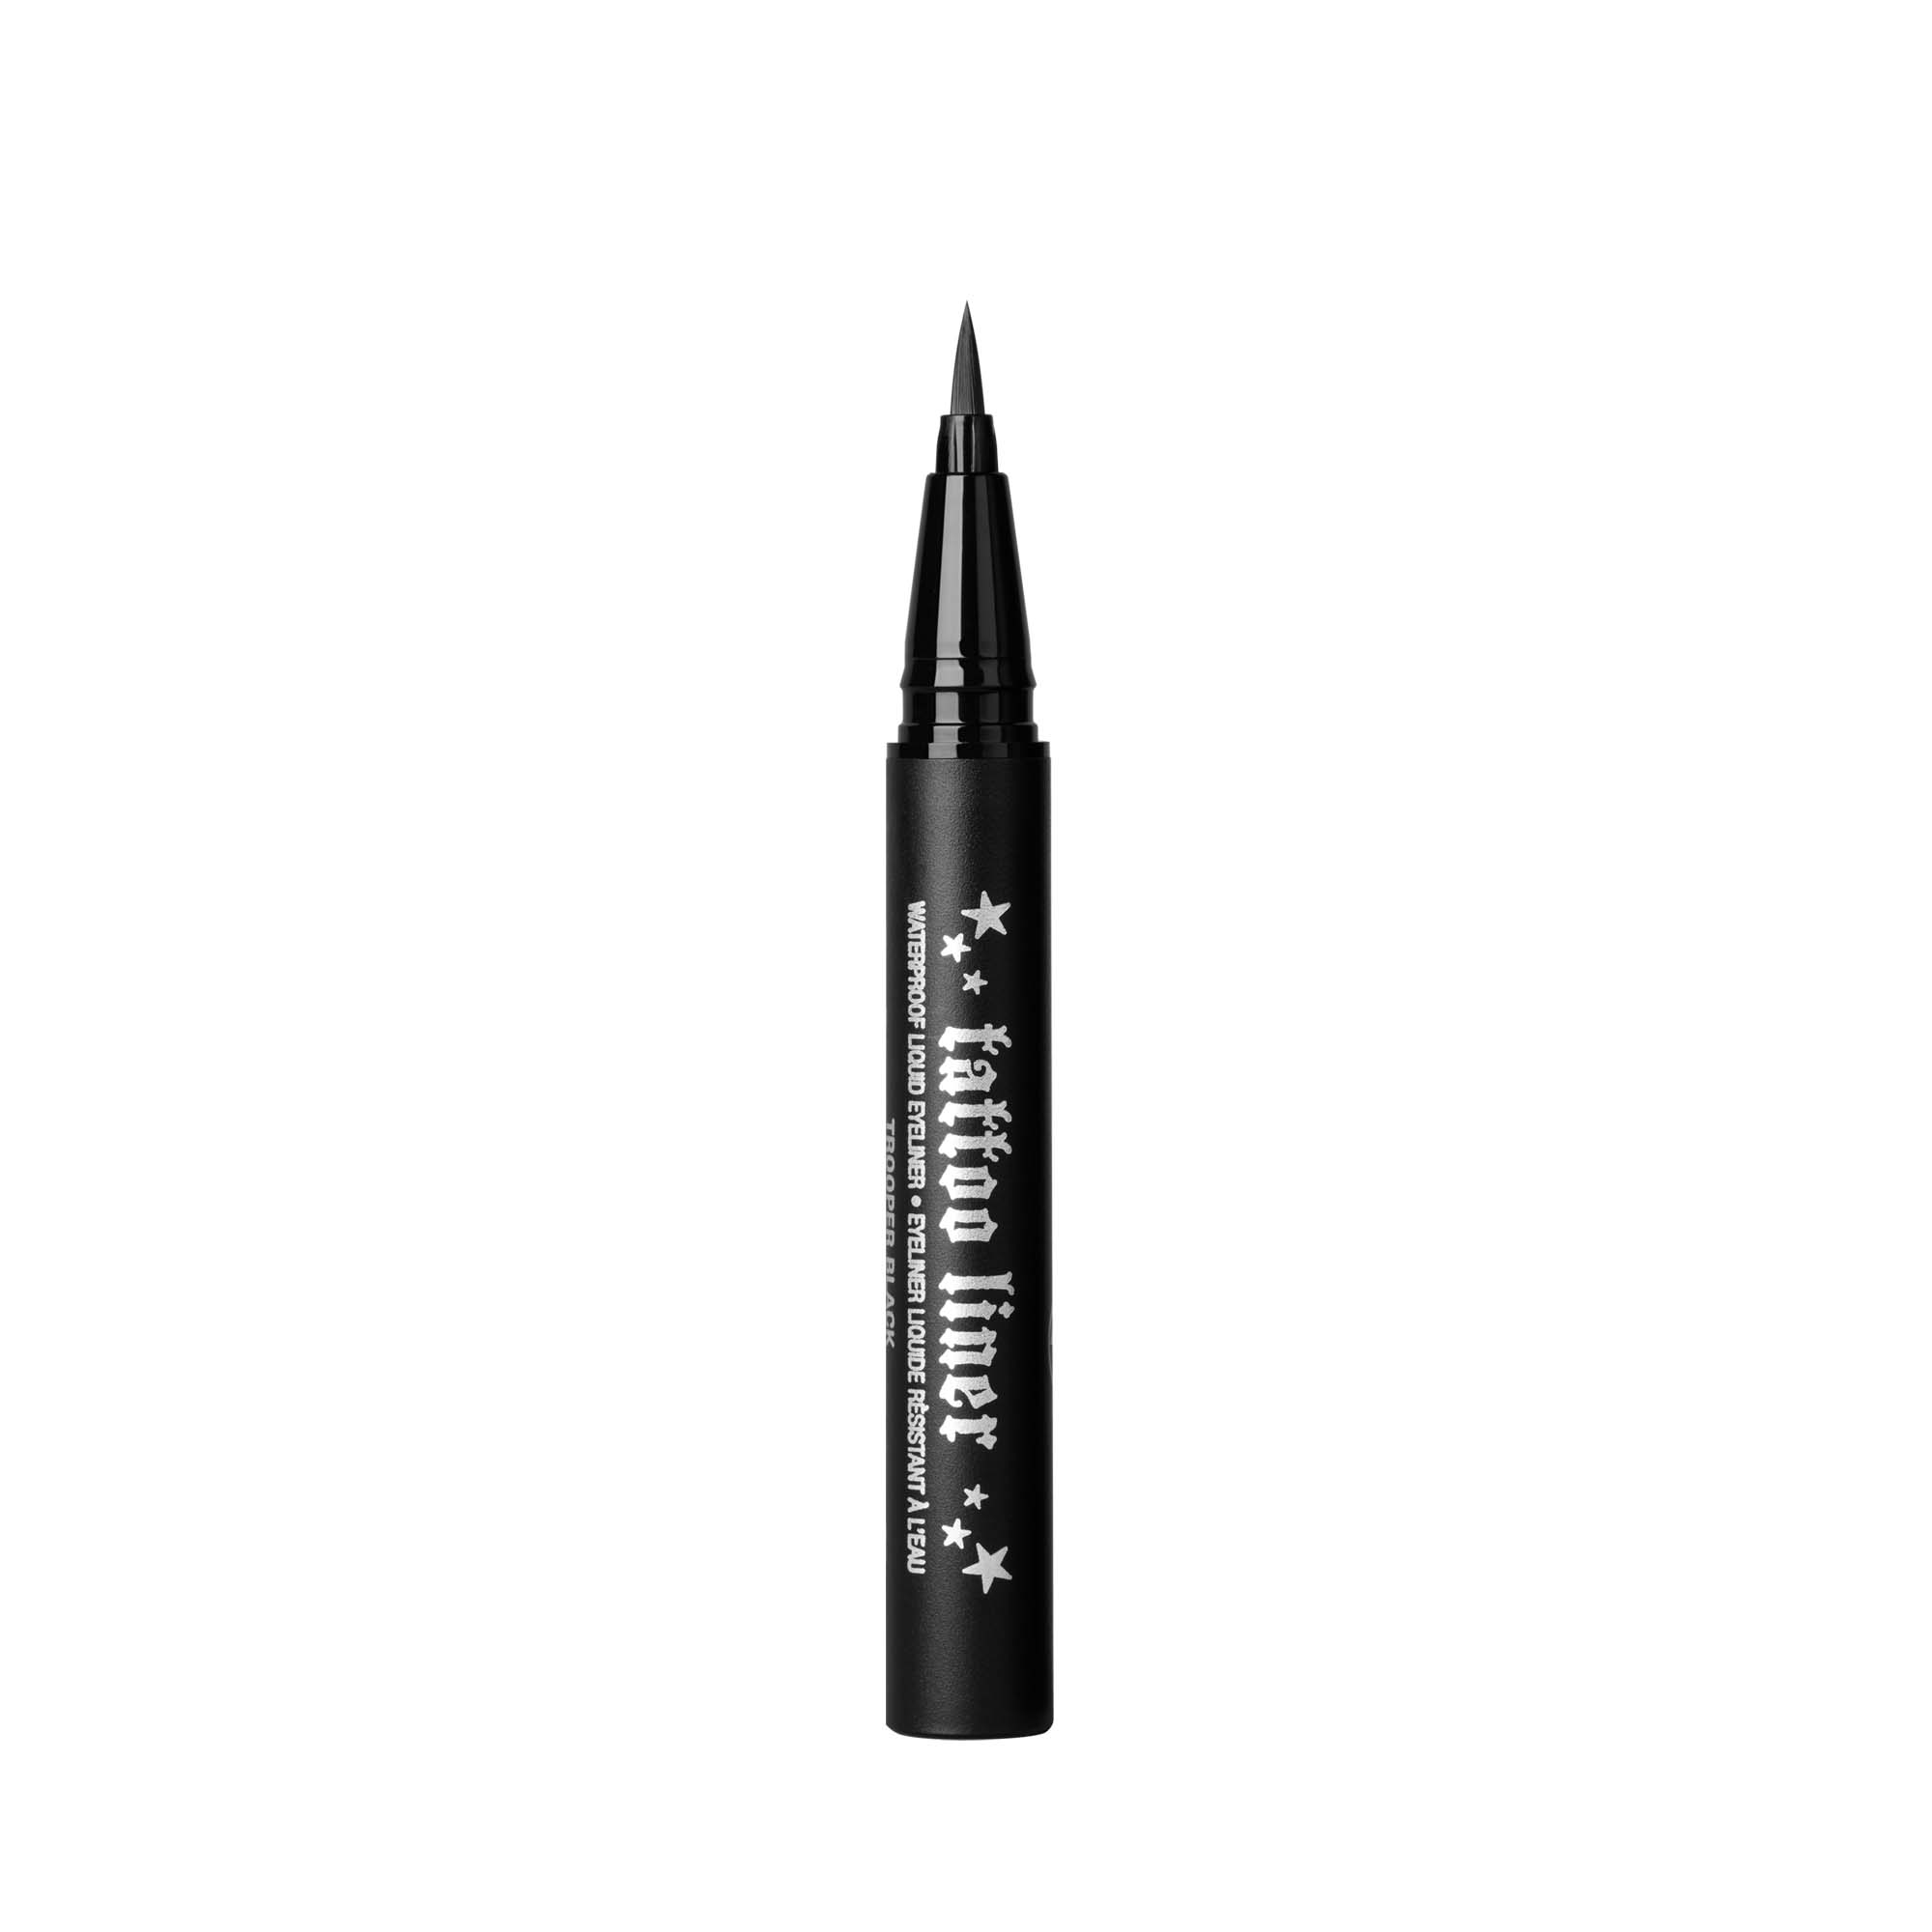 Get the perfect kvd tattoo liner mini look with this amazing product